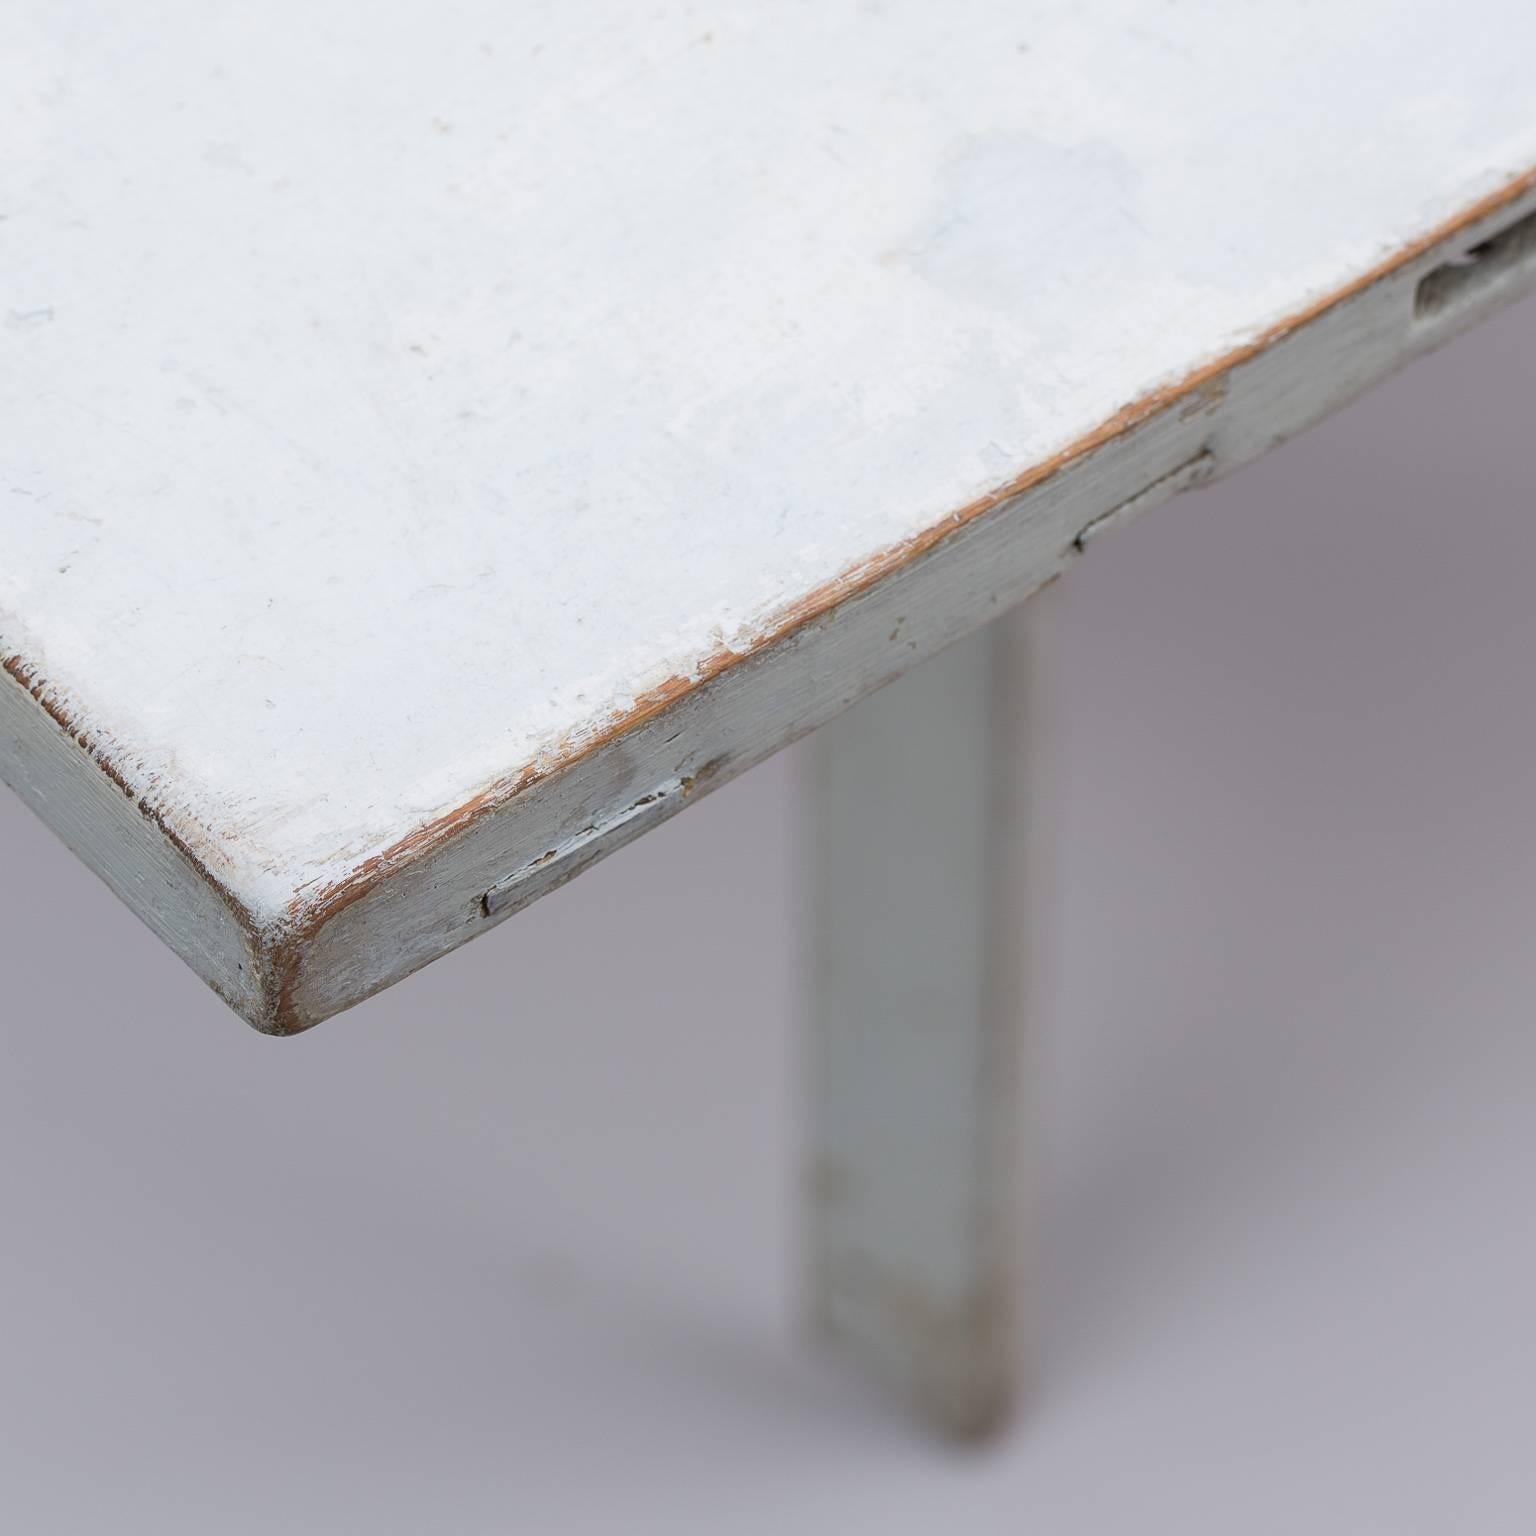 19th Century Swedish Pale Blue Painted Drop-Leaf Table, circa 1820